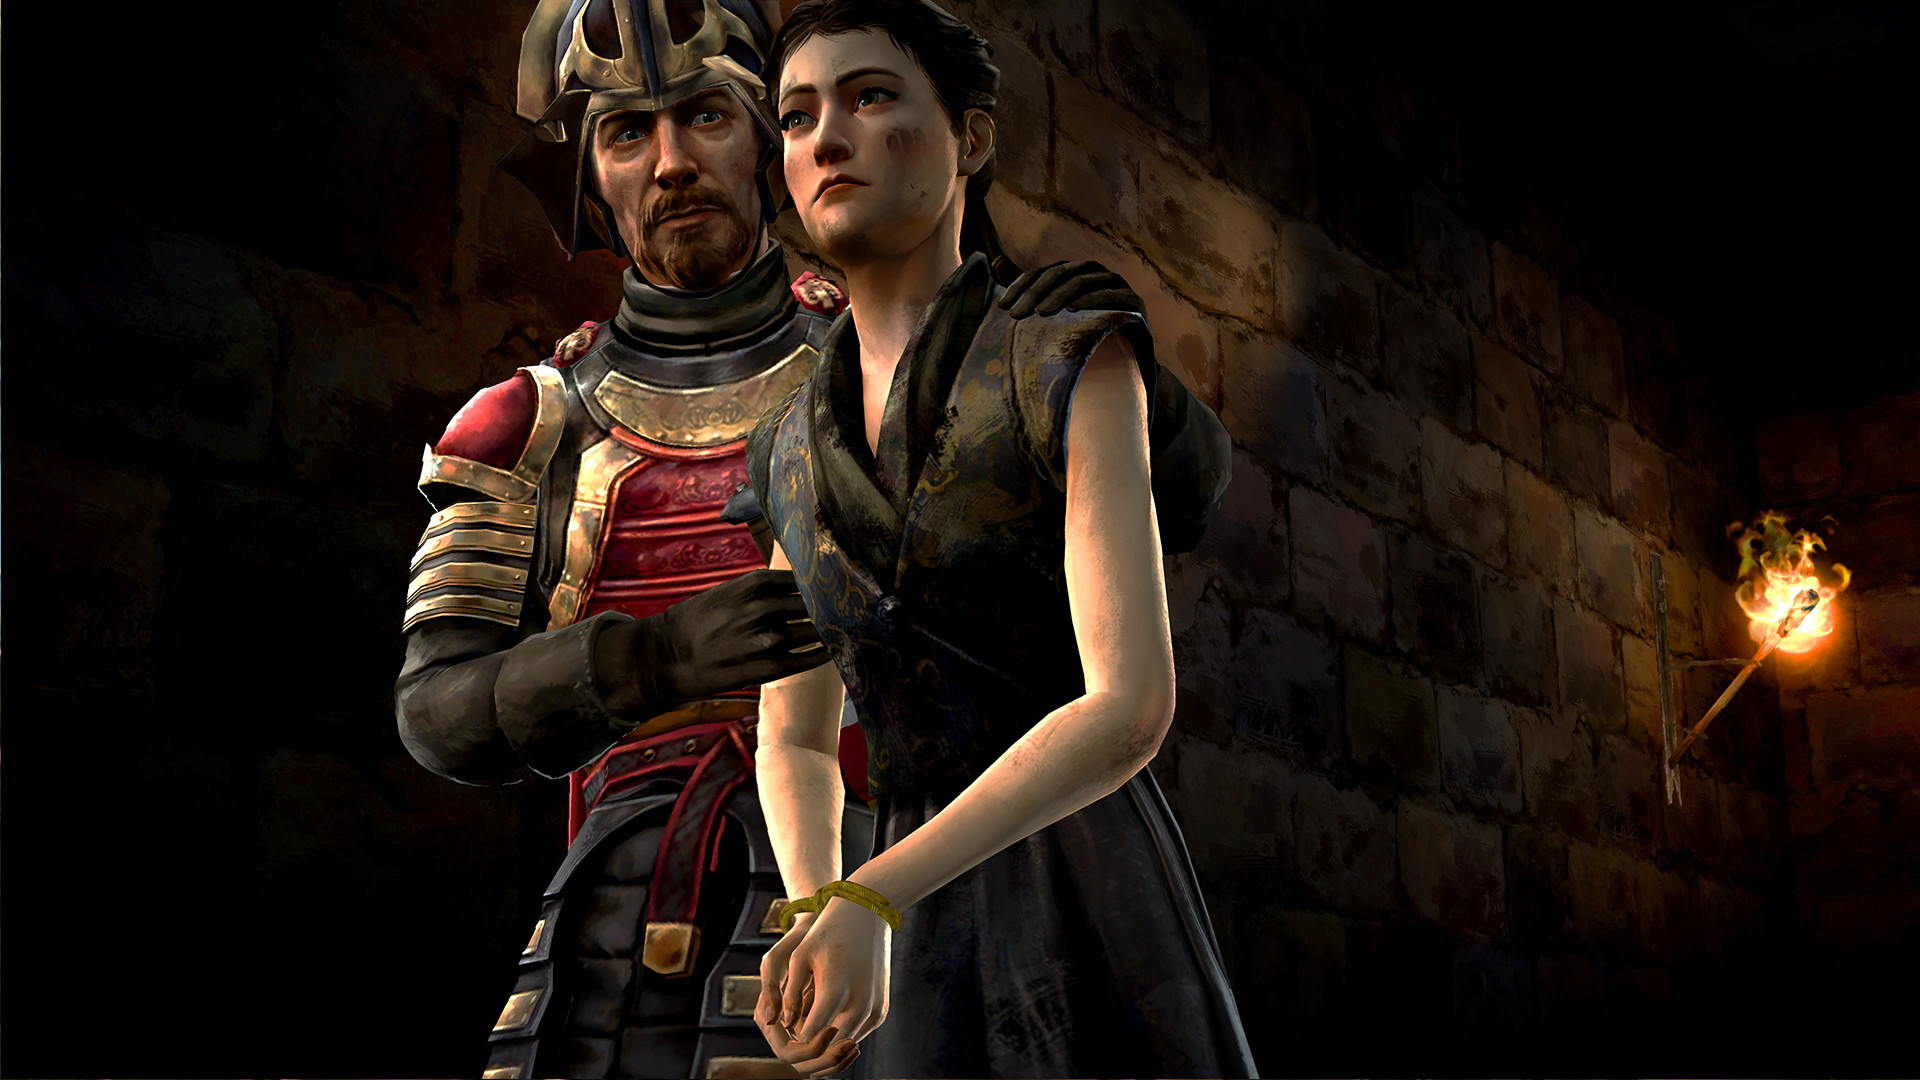 Game of Thrones: A Telltale Games Series - Episode 6: The Ice Dragon - screenshot 2